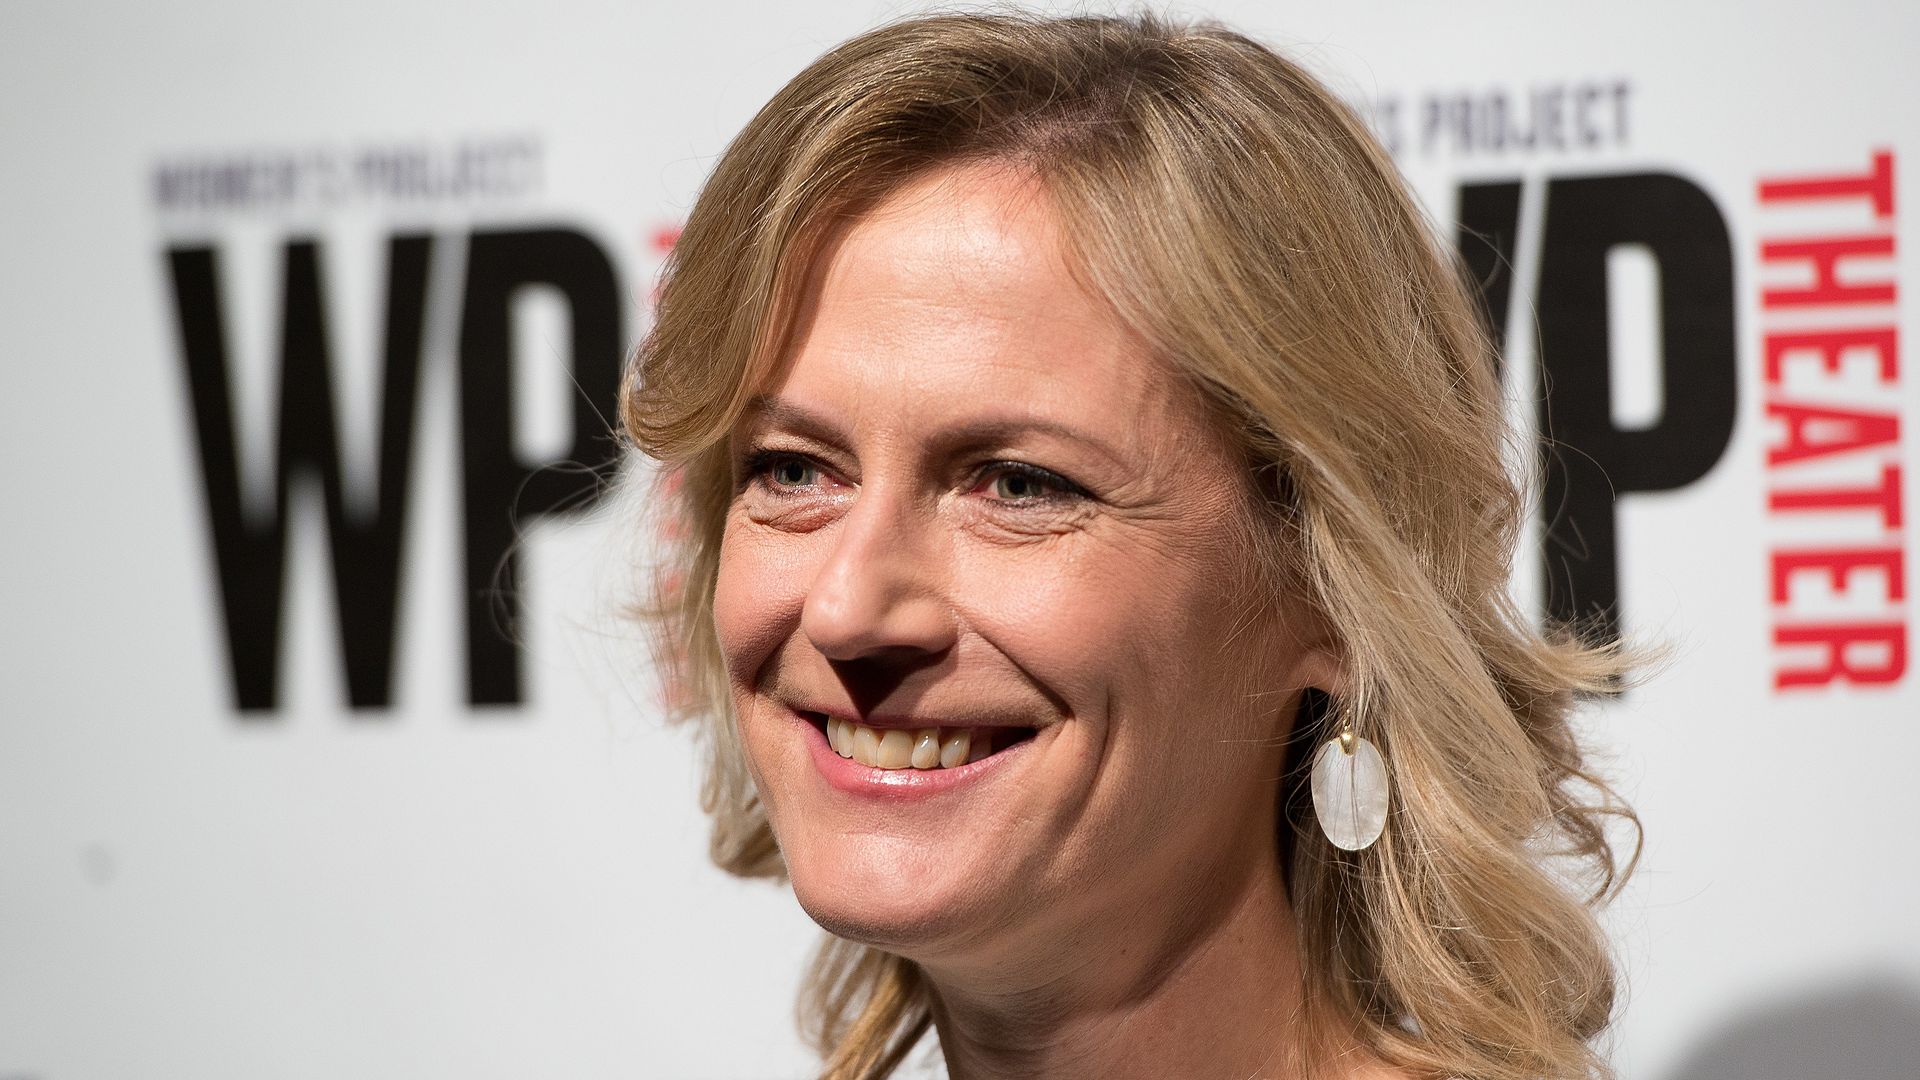 Ann Sarnoff attends the 32nd Annual WP Theater's Women of Achievement Awards Gala at The Edison Ballroom on March 27, 2017 in New York City. (Photo by Mike Pont/WireImage)